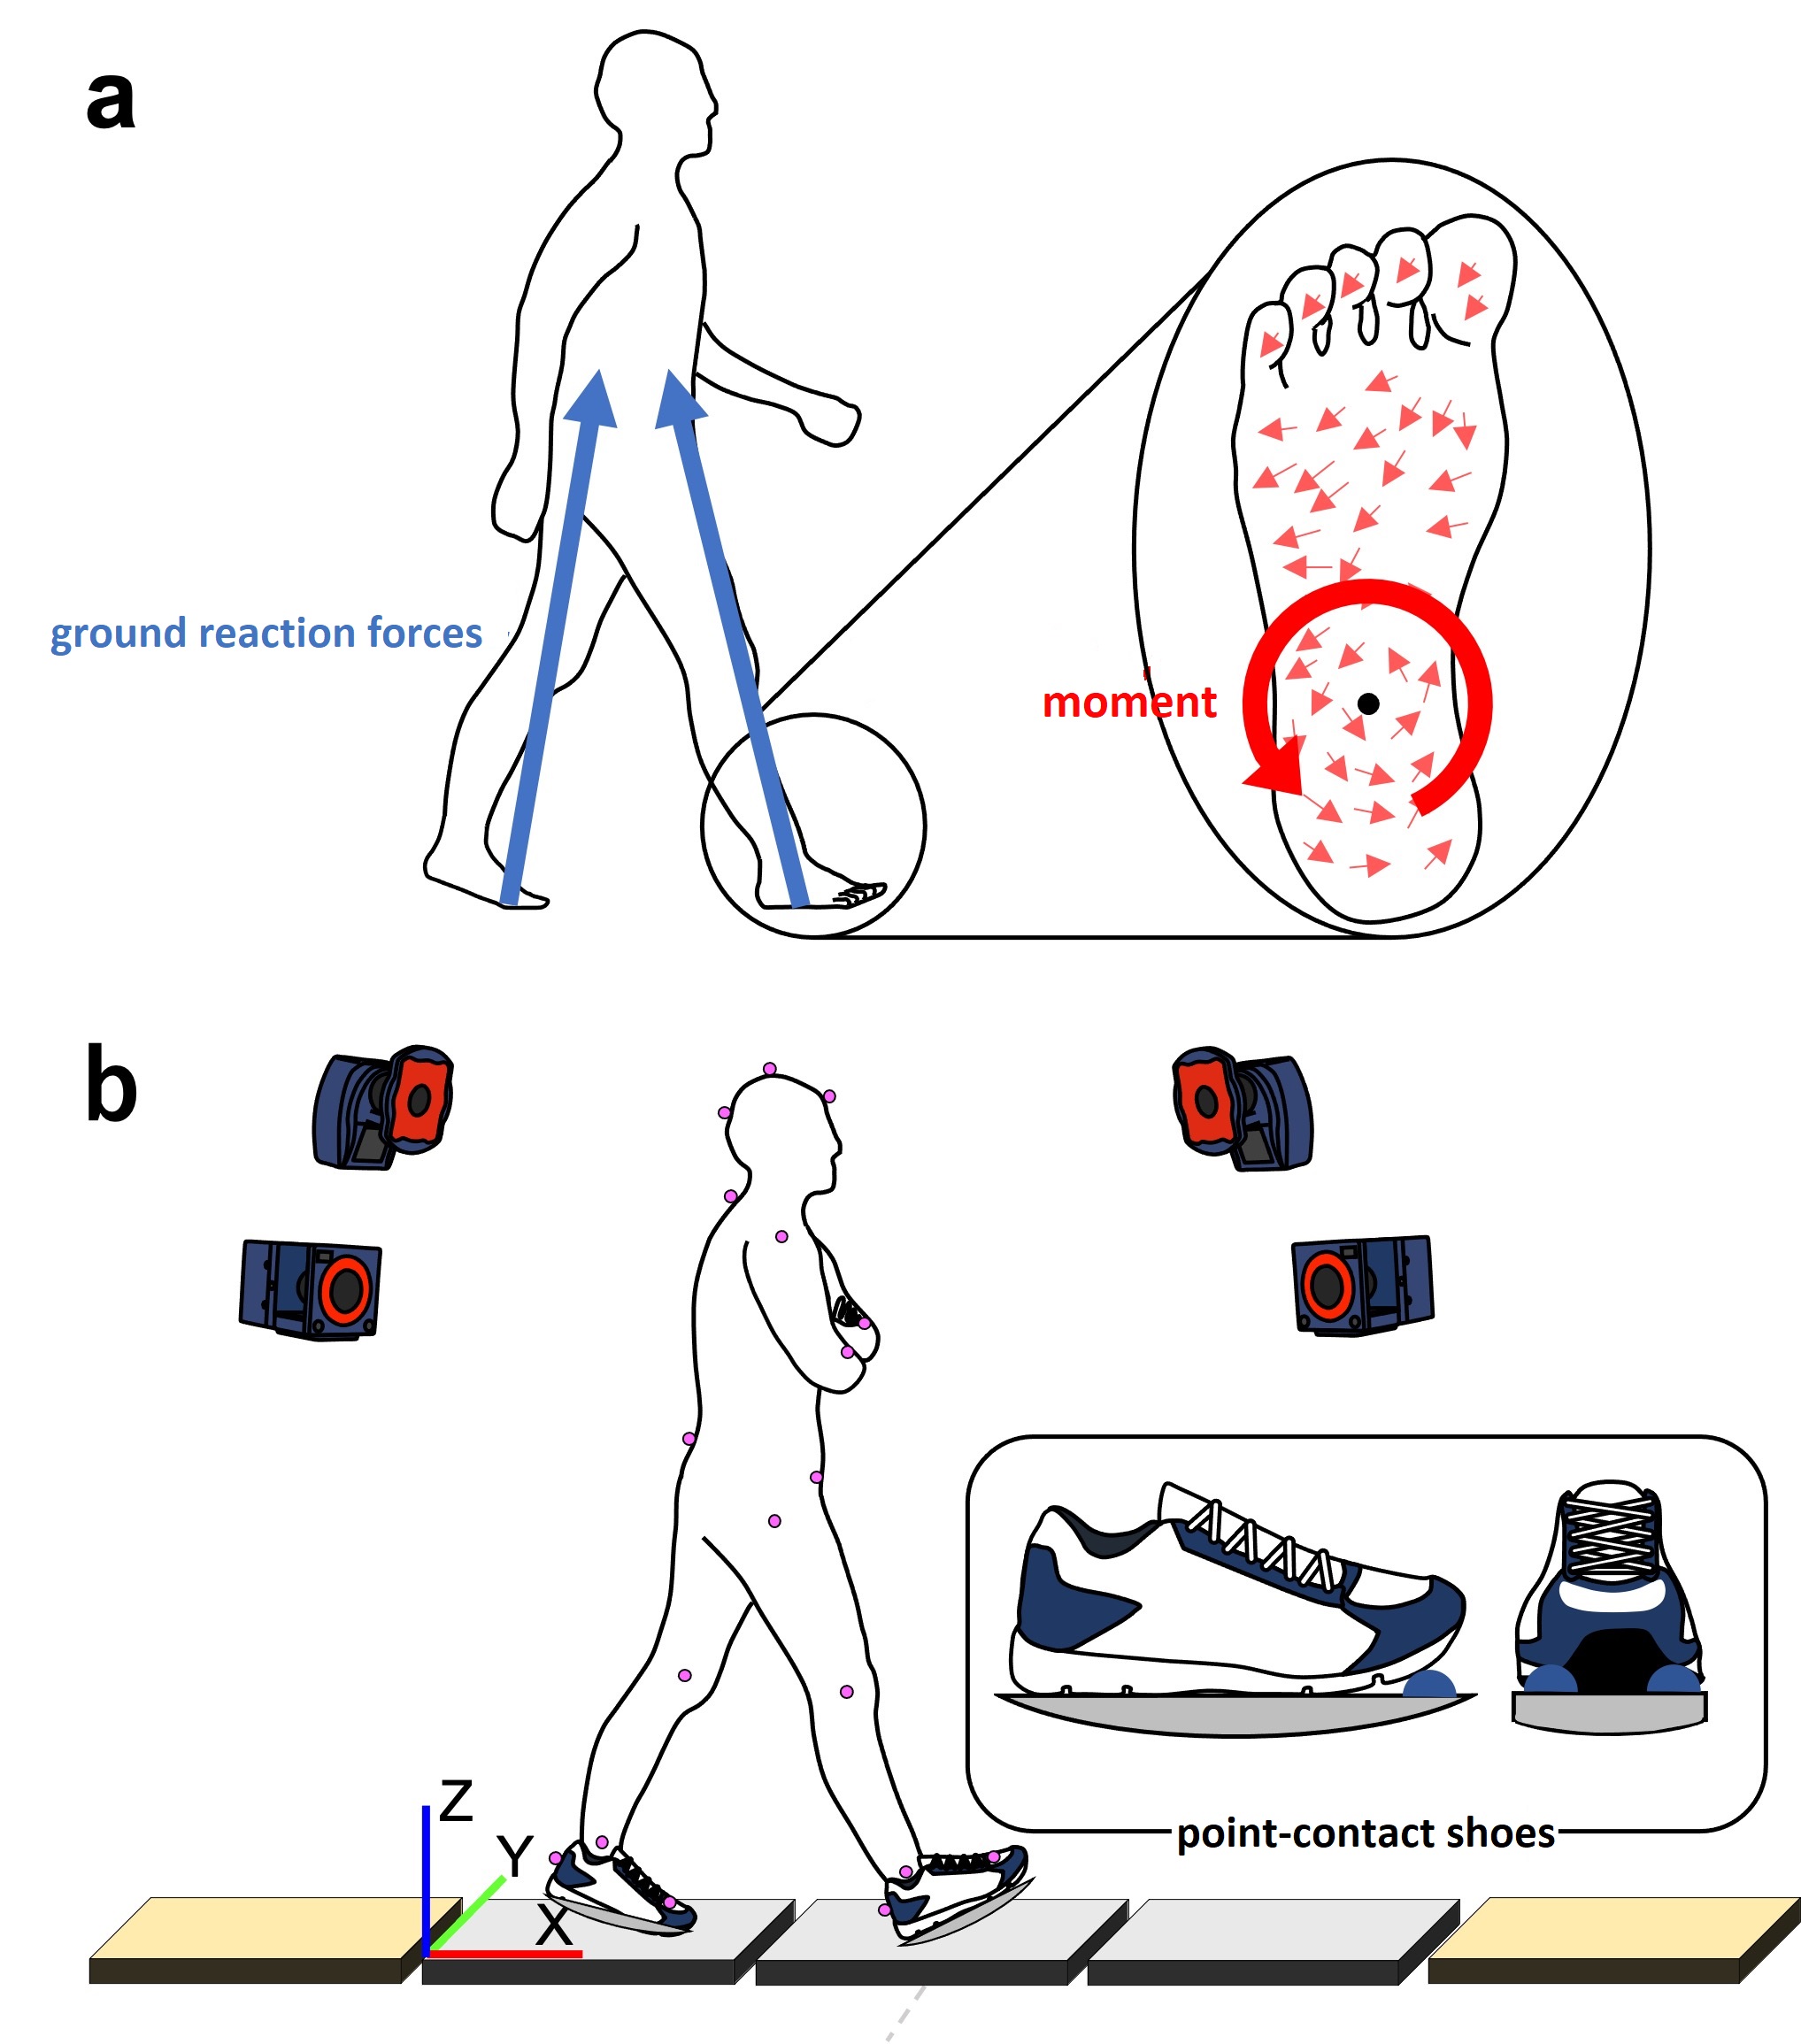 Mysteries in Science (Vol. 21)：The mystery of the moment acting on the sole during bipedal walking